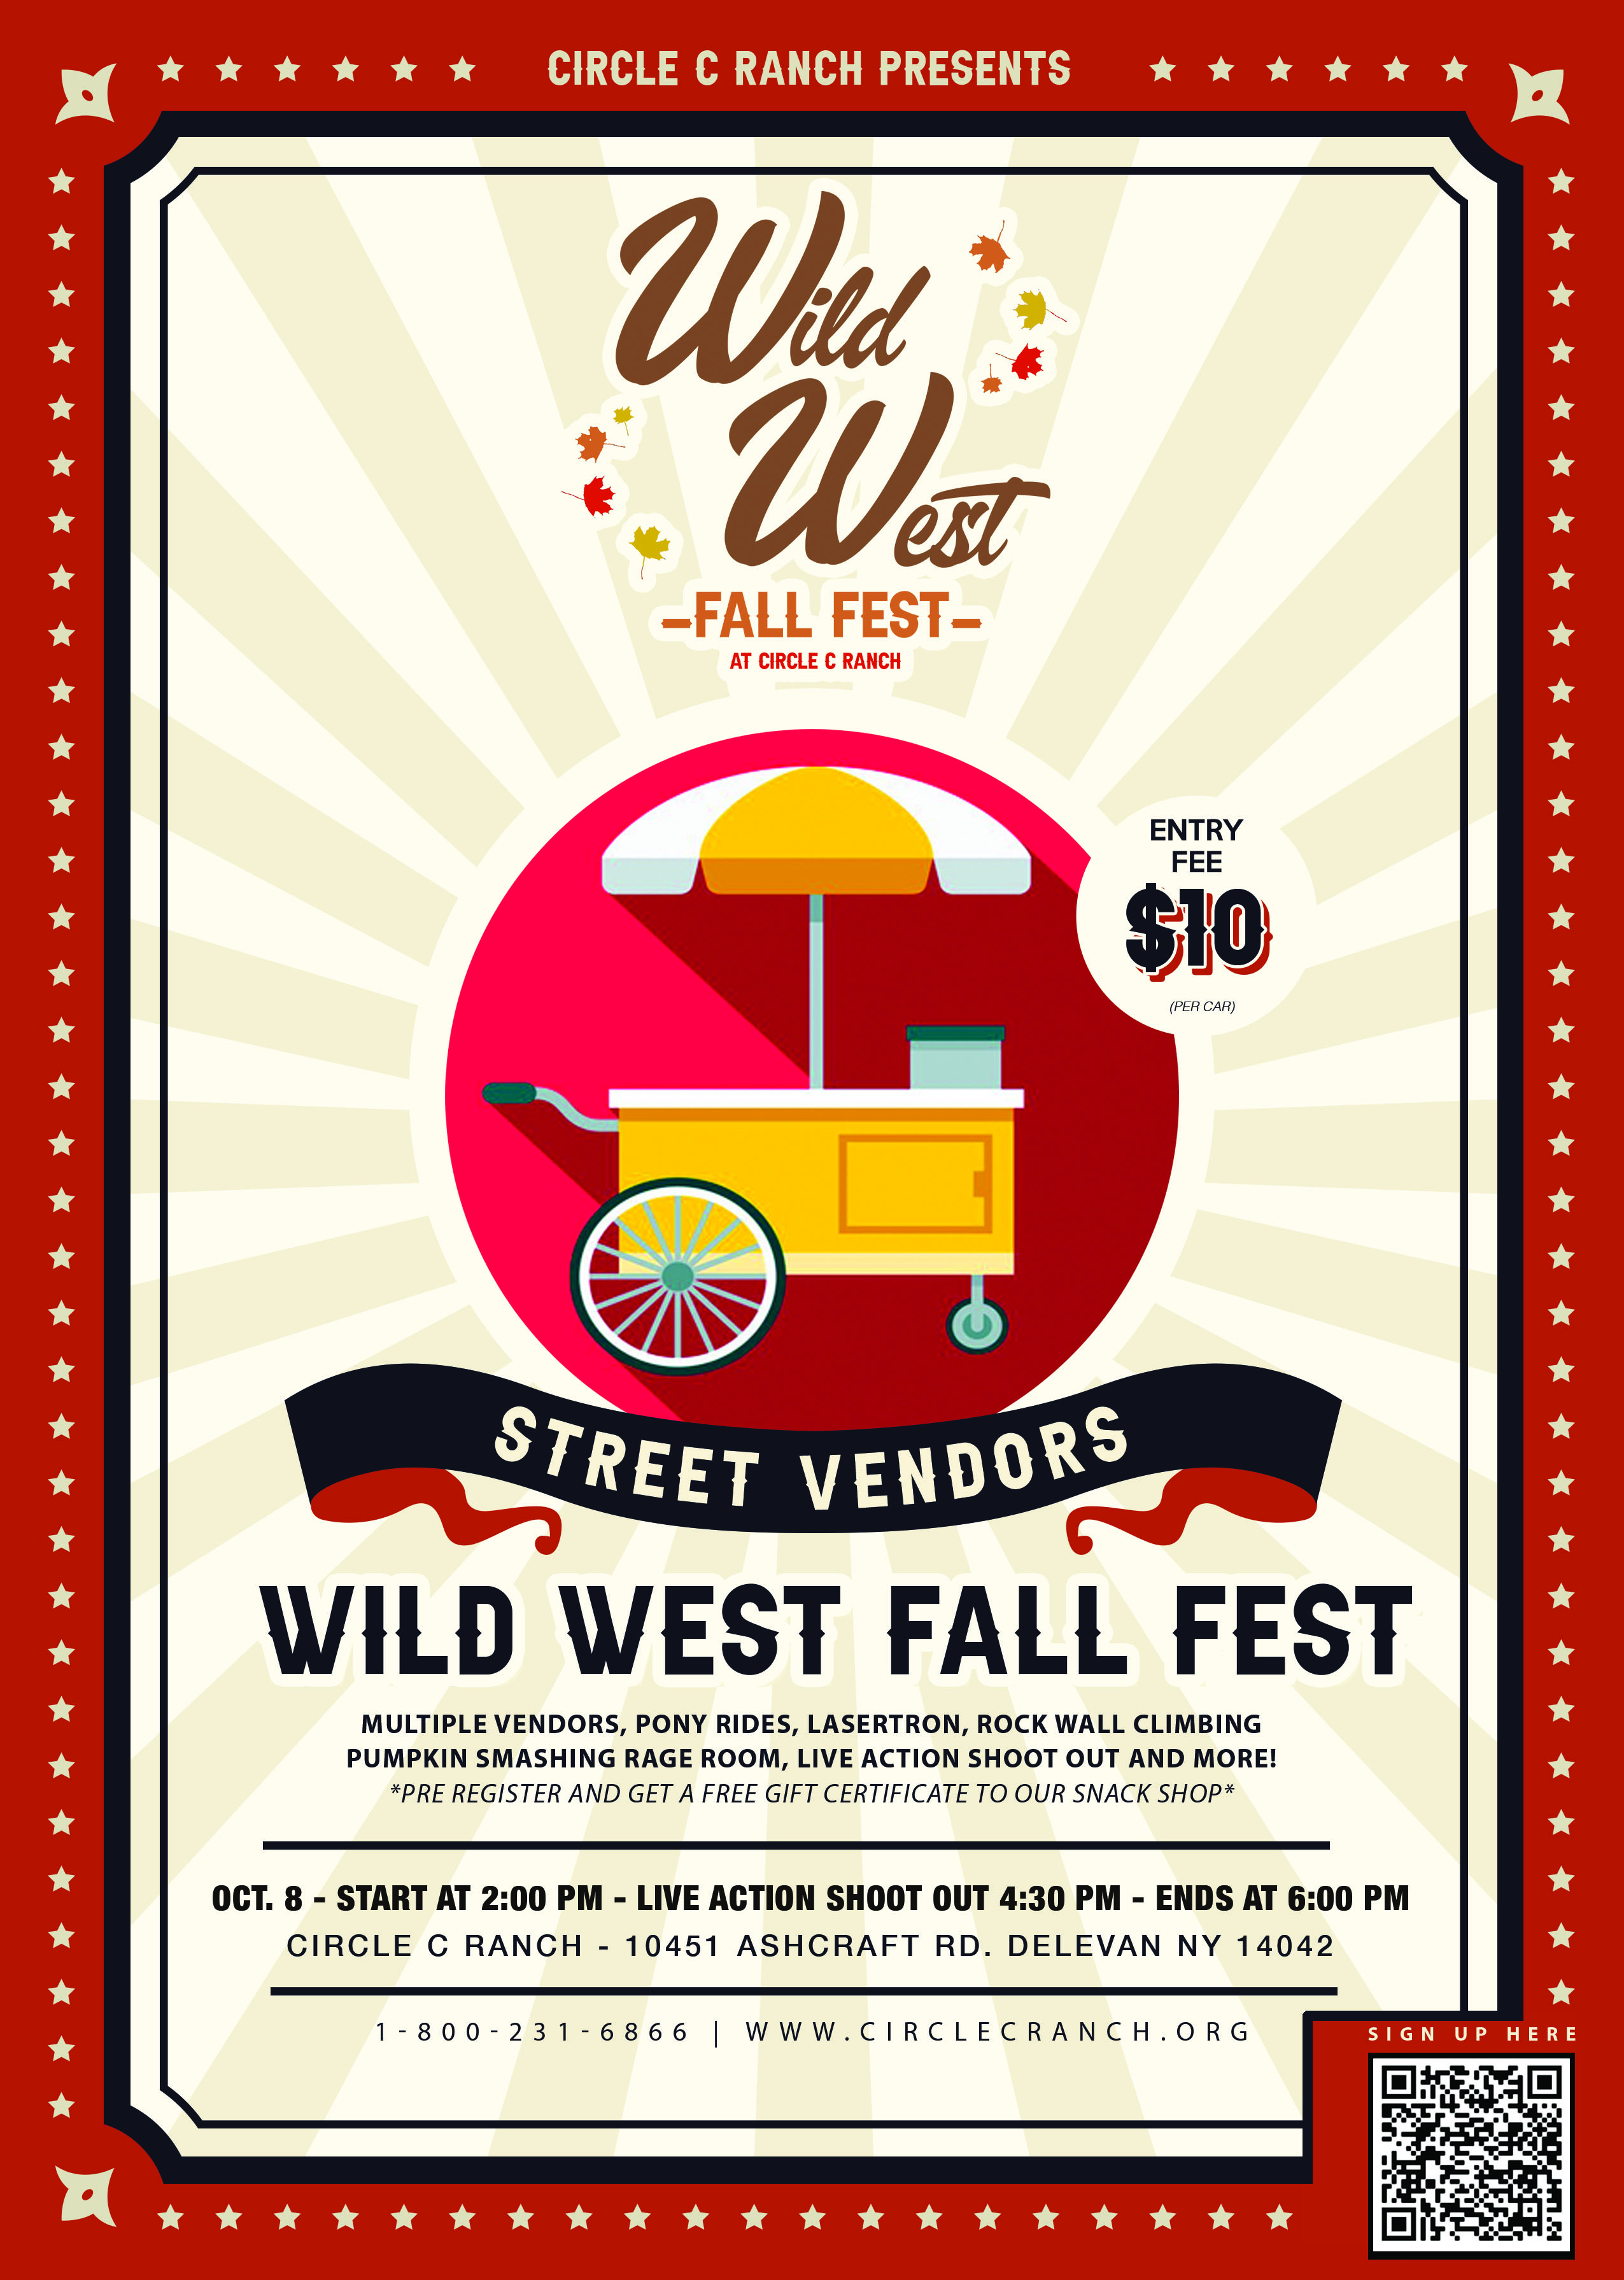 Flyers for Wild West Fall Fest 22Pie Eating